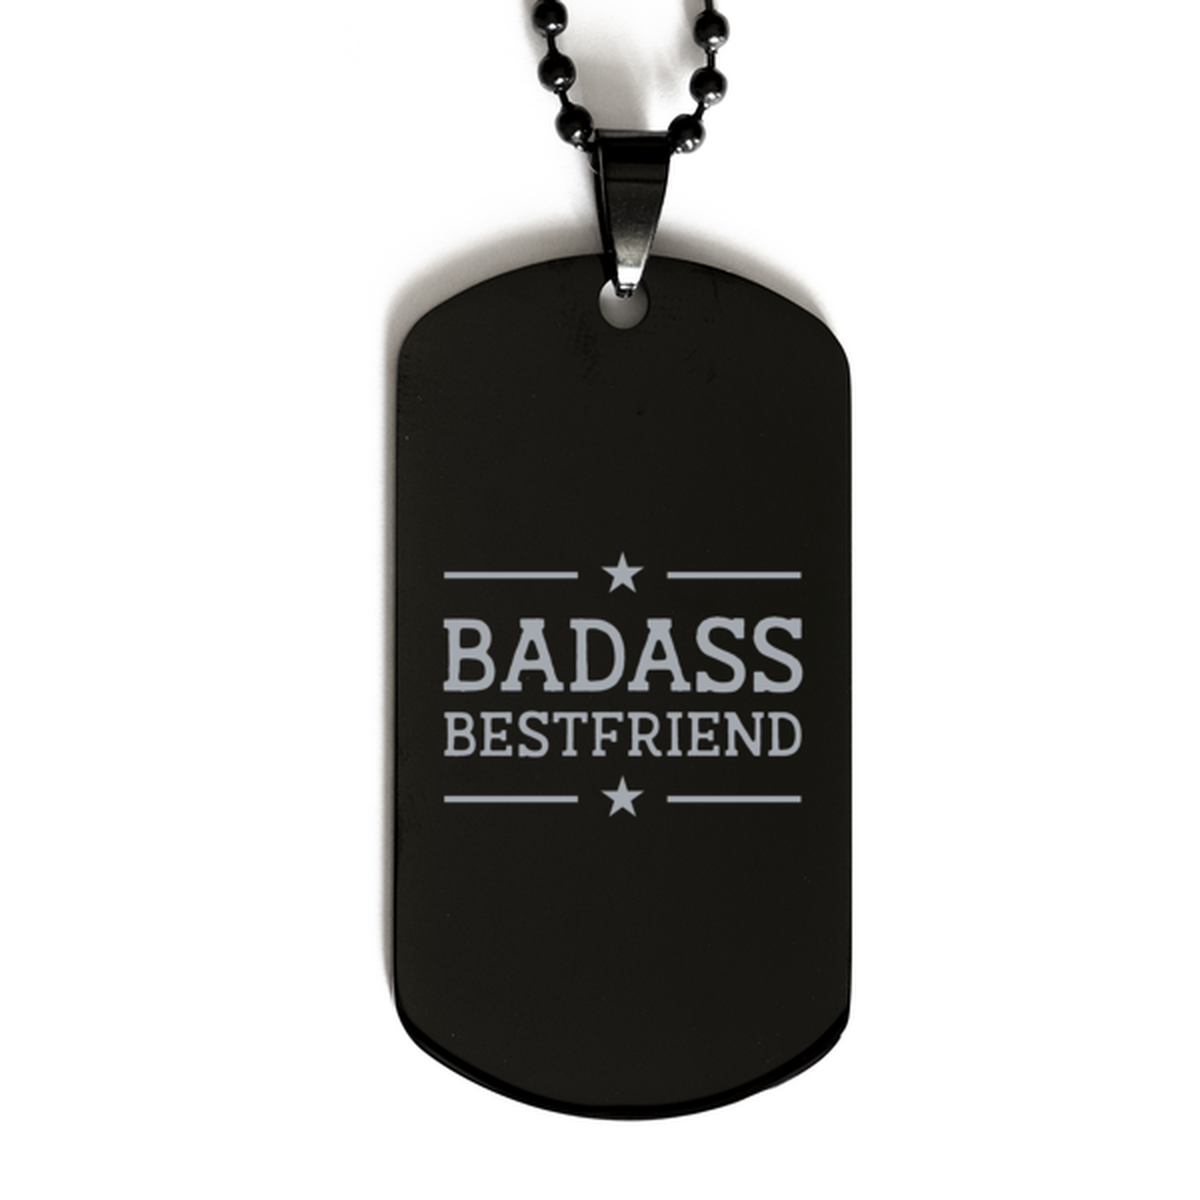 Bestfriend Black Dog Tag, Badass Bestfriend, Funny Family Gifts  Necklace For Bestfriend From Friends